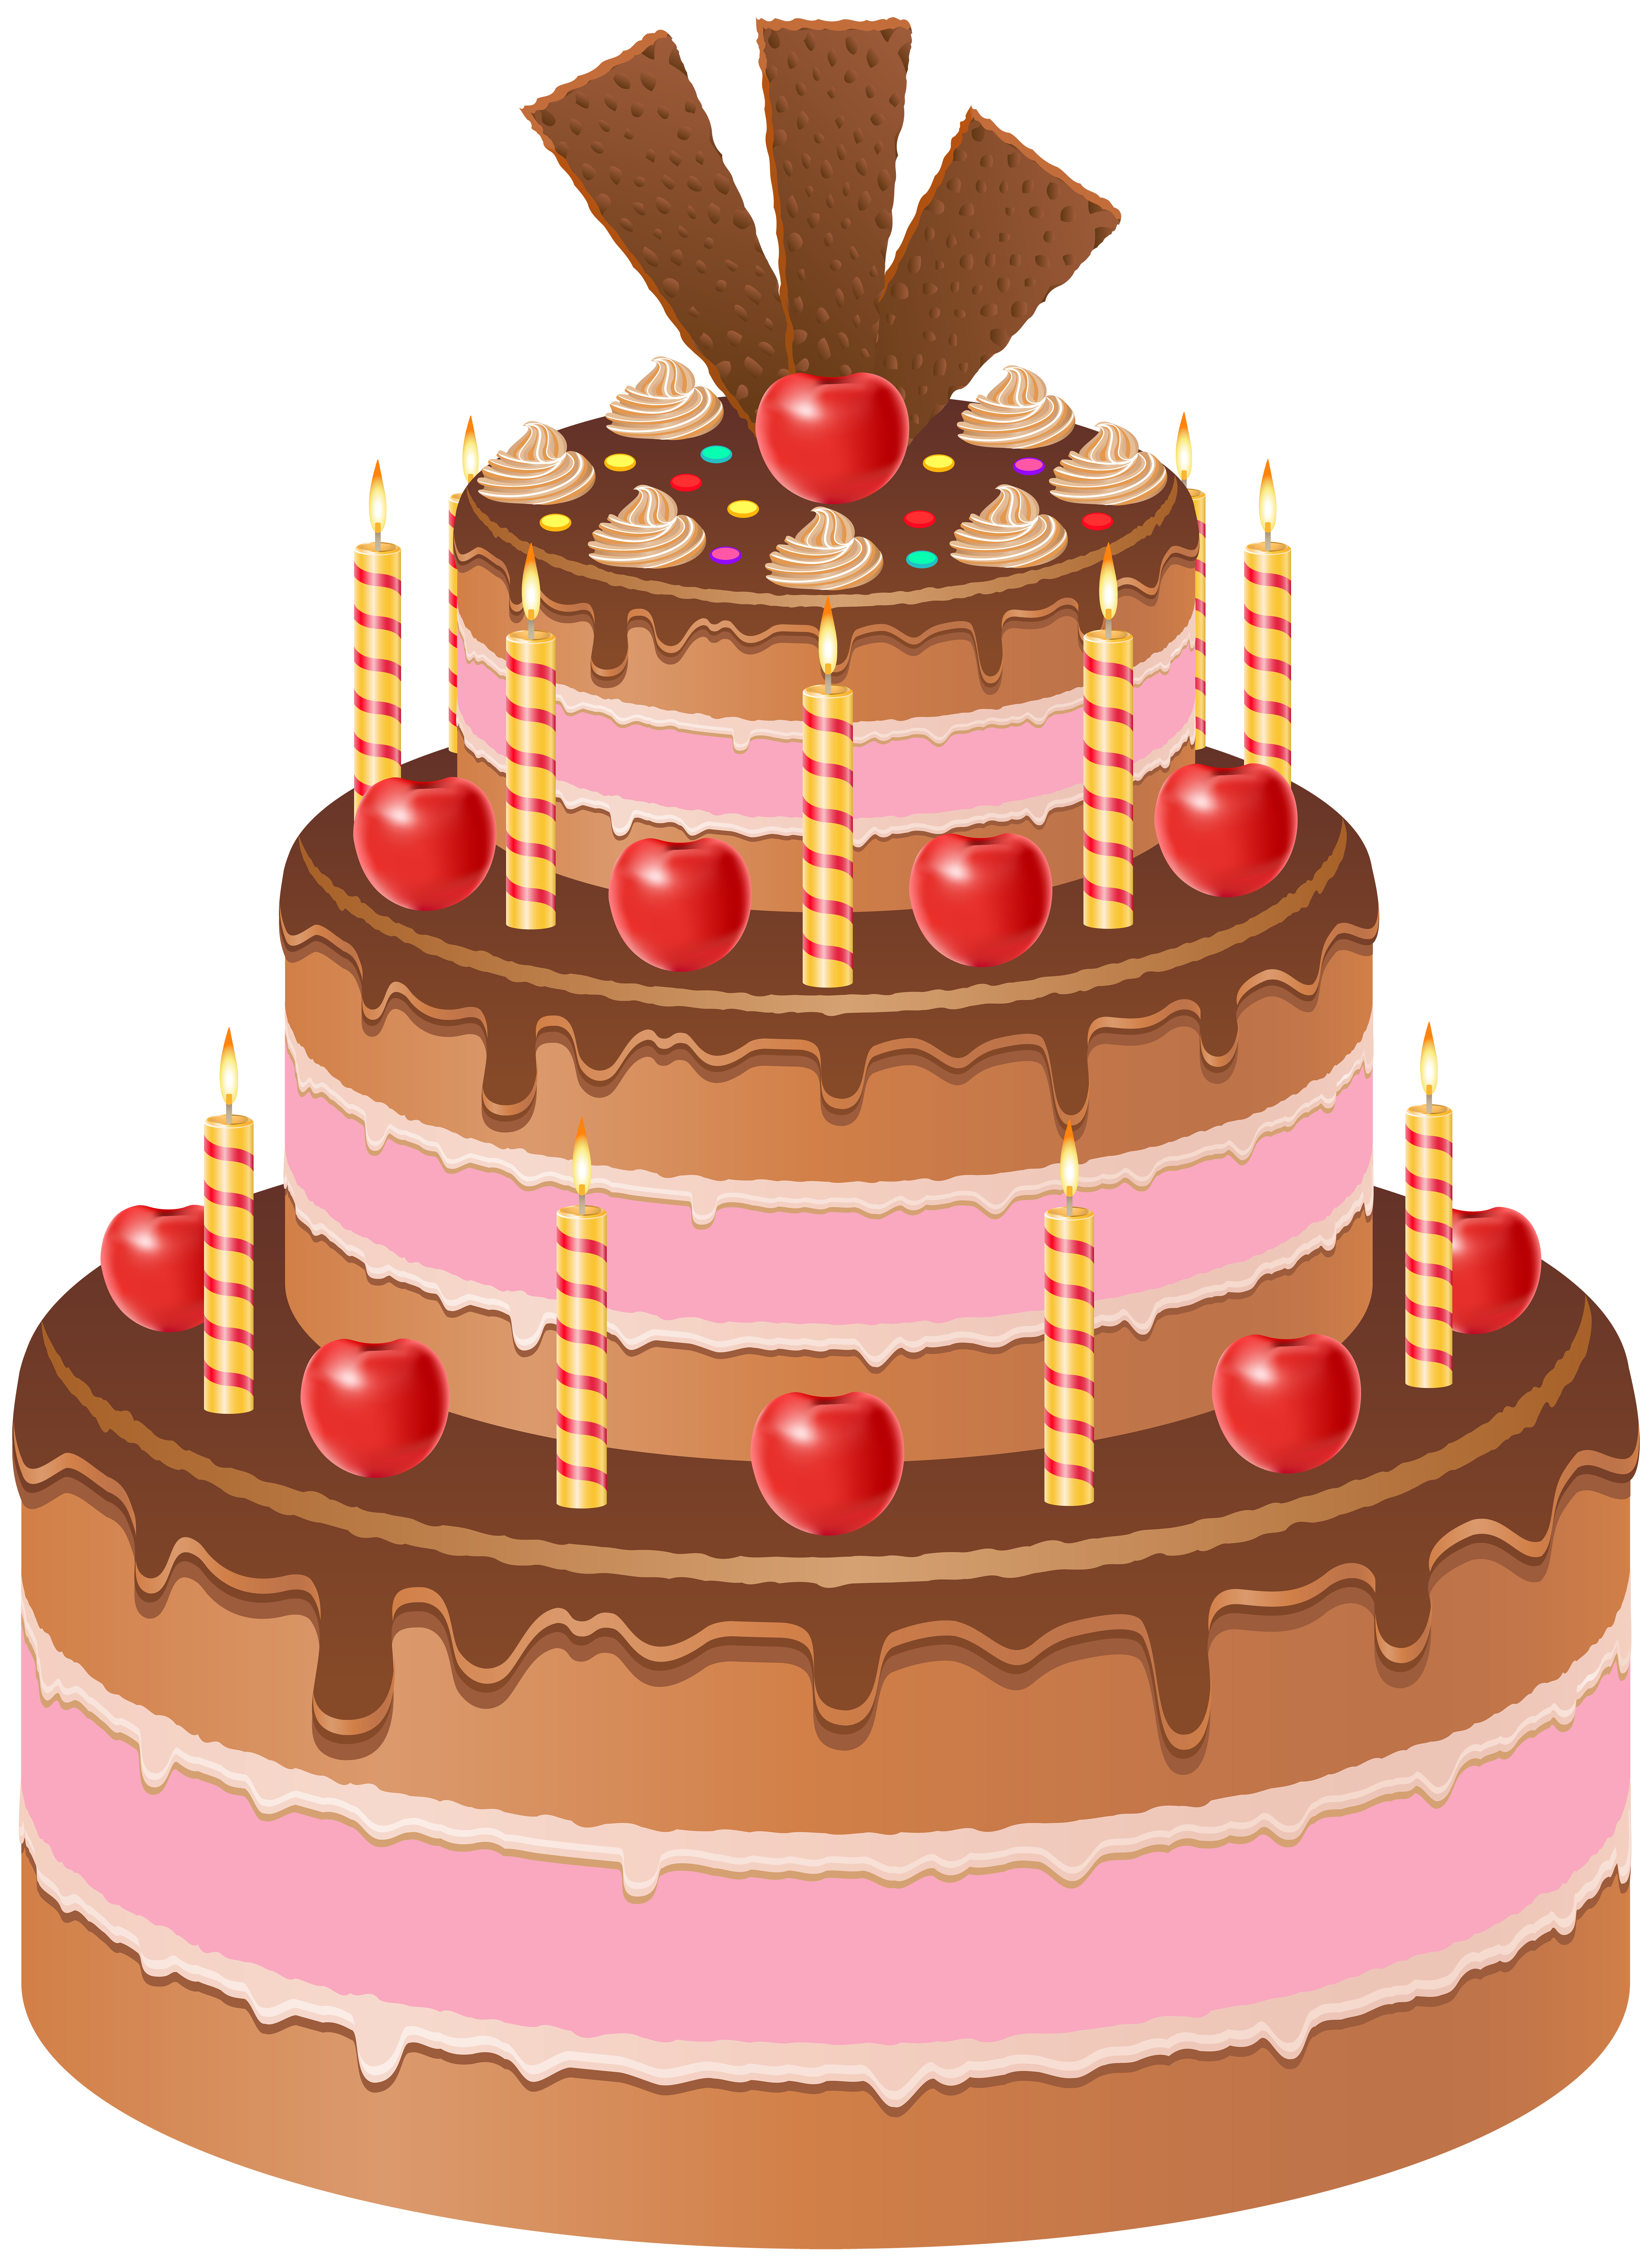 Cake PNG image transparent image download, size: 2741x1891px